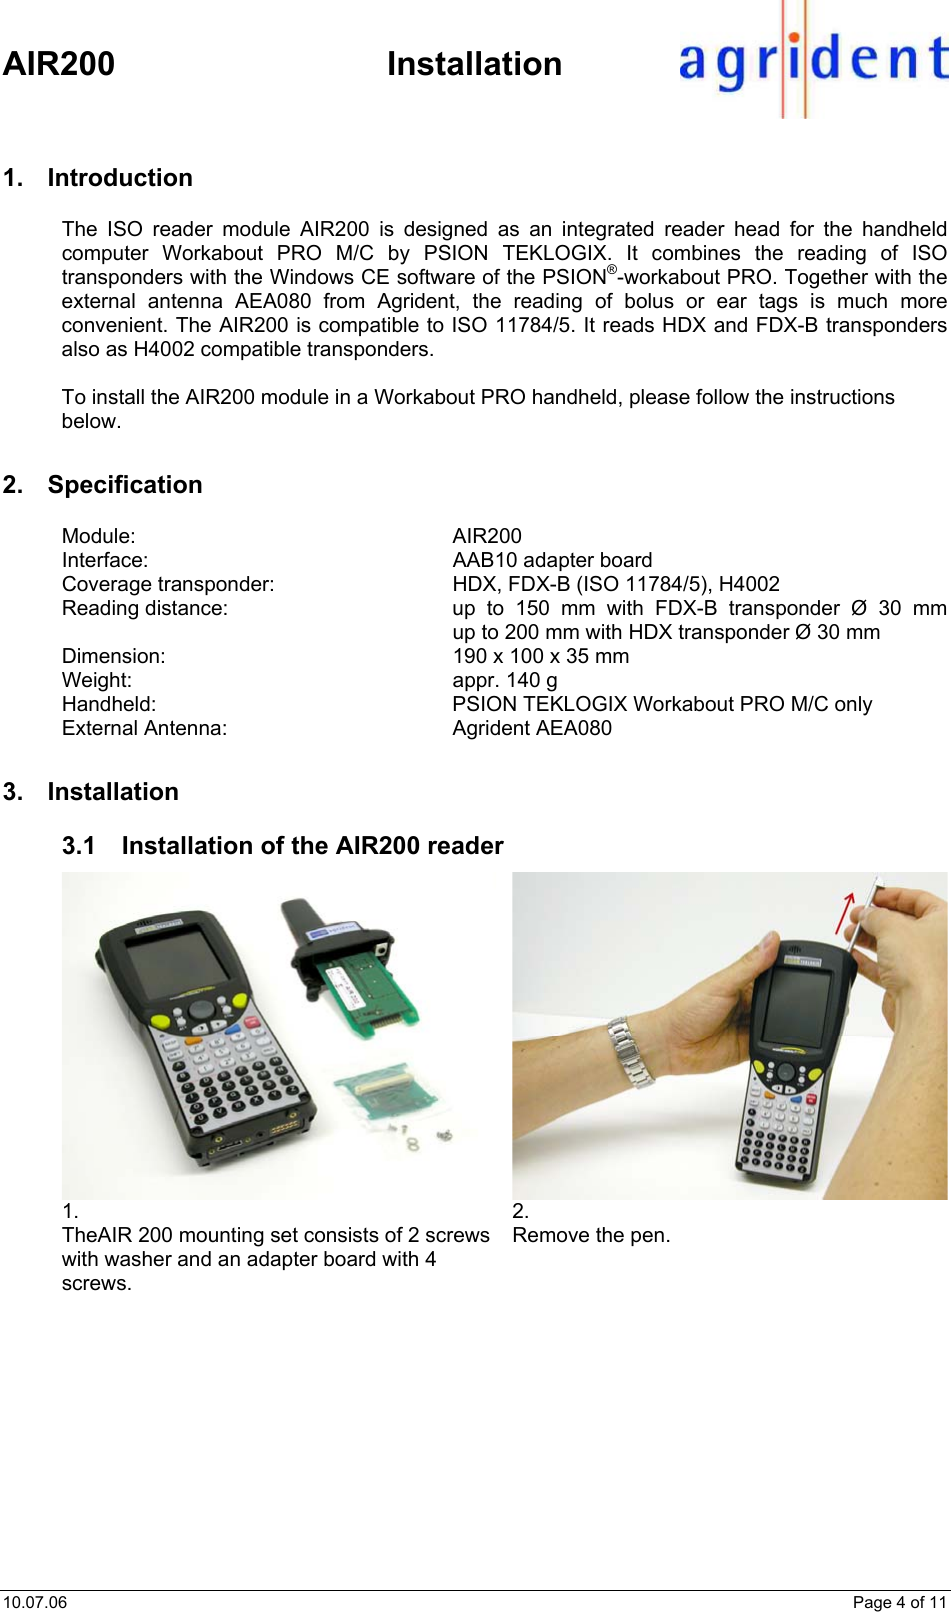    AIR200 Installation 10.07.06    Page 4 of 11 1. Introduction The ISO reader module AIR200 is designed as an integrated reader head for the handheld computer Workabout PRO M/C by PSION TEKLOGIX. It combines the reading of ISO transponders with the Windows CE software of the PSION®-workabout PRO. Together with the external antenna AEA080 from Agrident, the reading of bolus or ear tags is much more convenient. The AIR200 is compatible to ISO 11784/5. It reads HDX and FDX-B transponders also as H4002 compatible transponders.  To install the AIR200 module in a Workabout PRO handheld, please follow the instructions below. 2. Specification Module: AIR200 Interface:  AAB10 adapter board Coverage transponder:  HDX, FDX-B (ISO 11784/5), H4002 Reading distance:  up to 150 mm with FDX-B transponder Ø 30 mm up to 200 mm with HDX transponder Ø 30 mm Dimension:  190 x 100 x 35 mm Weight:  appr. 140 g Handheld:  PSION TEKLOGIX Workabout PRO M/C only External Antenna:  Agrident AEA080 3. Installation 3.1  Installation of the AIR200 reader 1.  TheAIR 200 mounting set consists of 2 screws with washer and an adapter board with 4 screws.  2.  Remove the pen.  